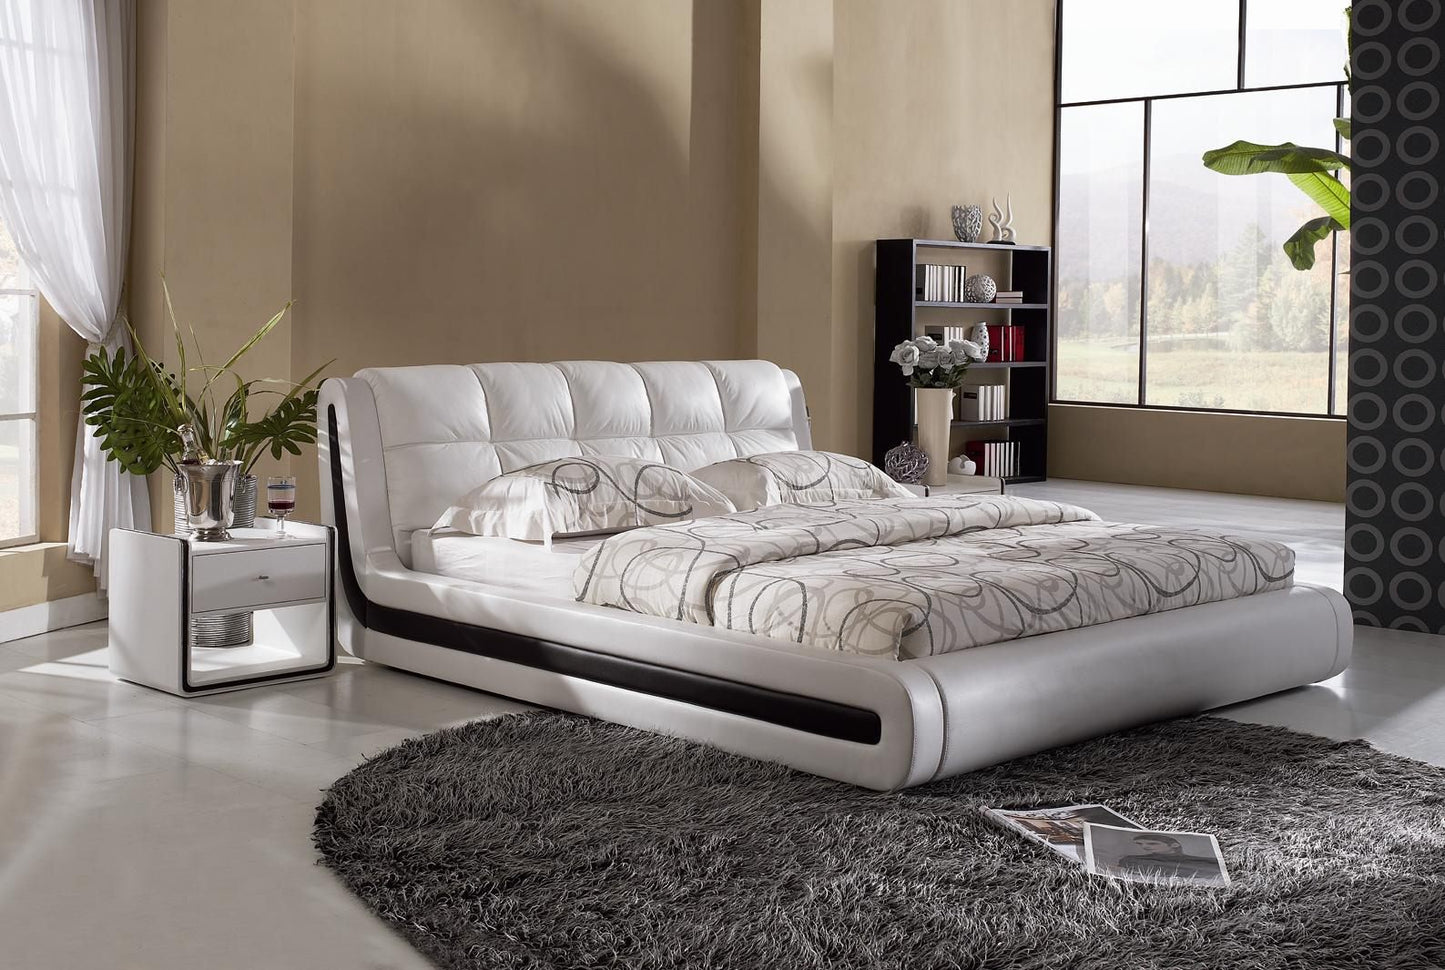 High Quality Italian Leather Bed Frame #031, CLEARANCE SALE